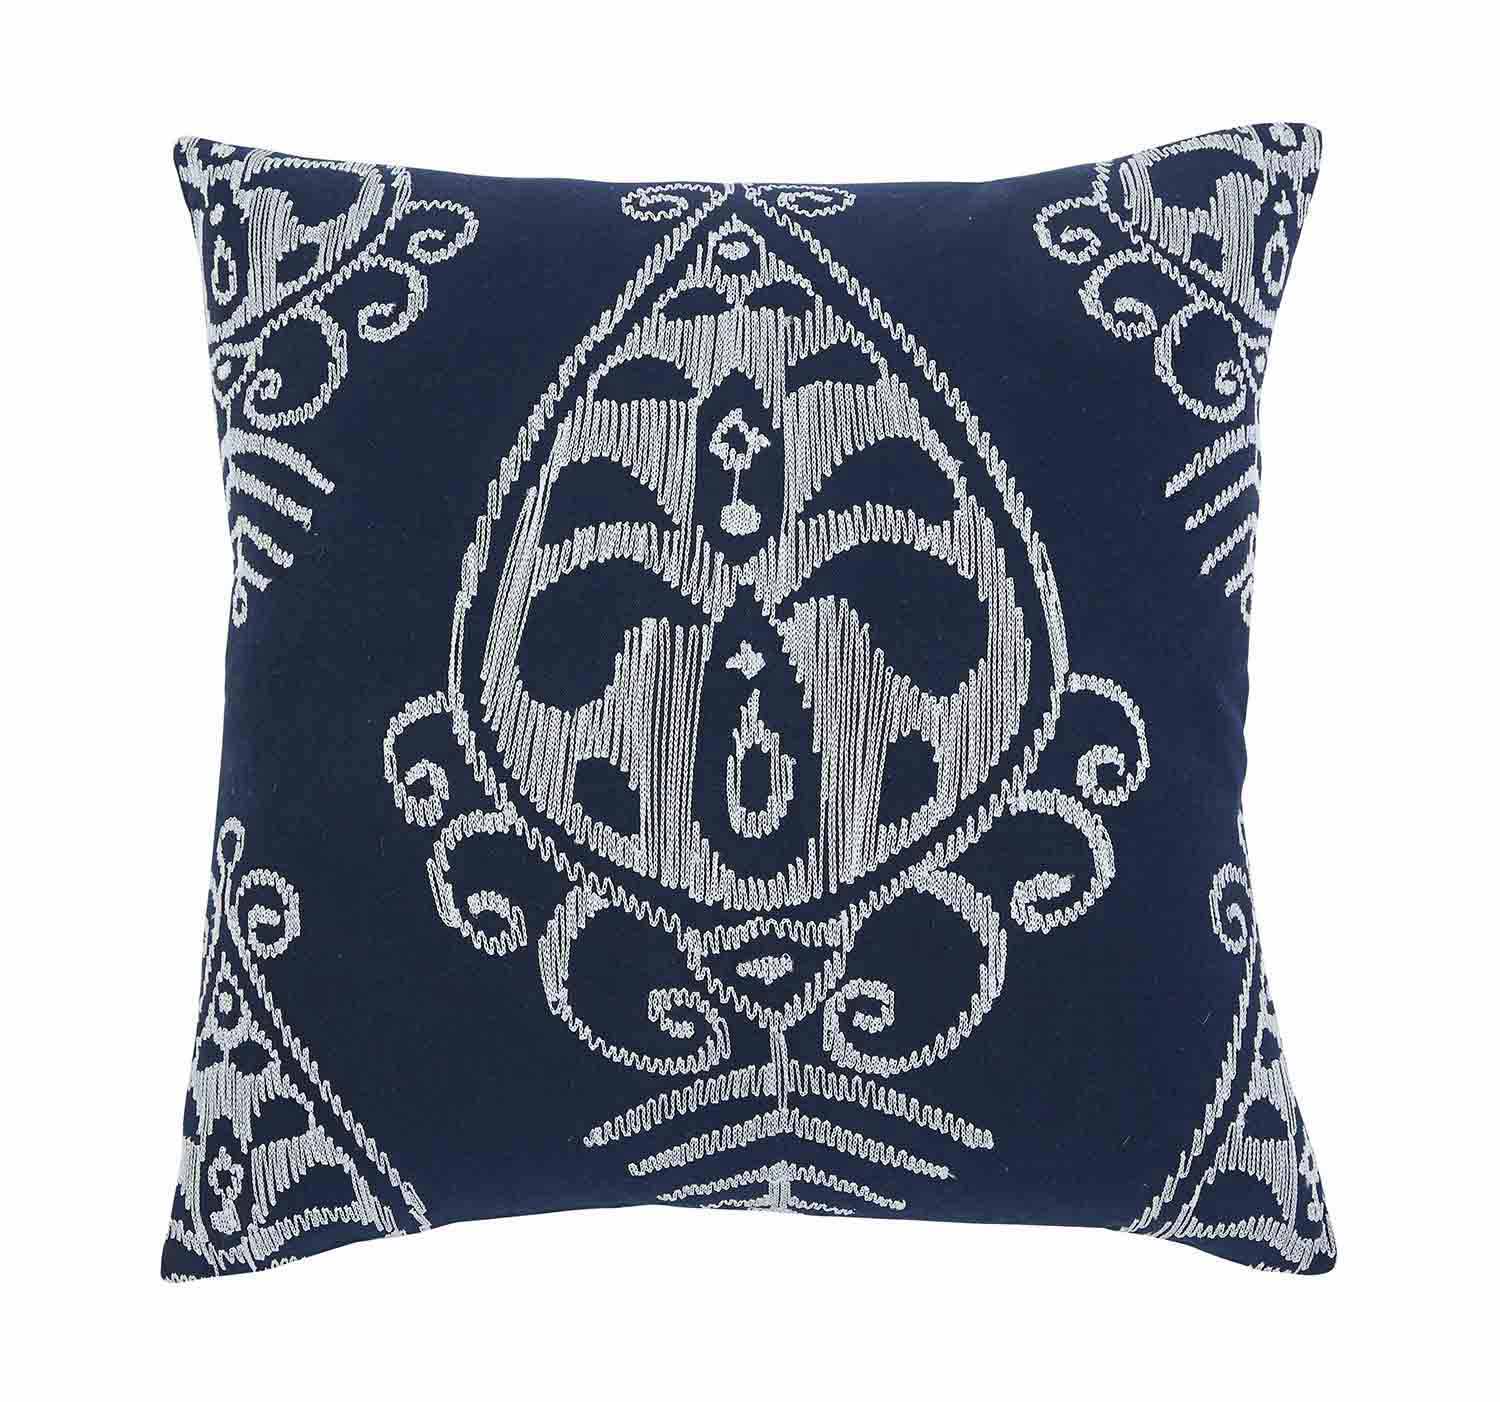 Ashley Embroidered Pillow Cover - Navy